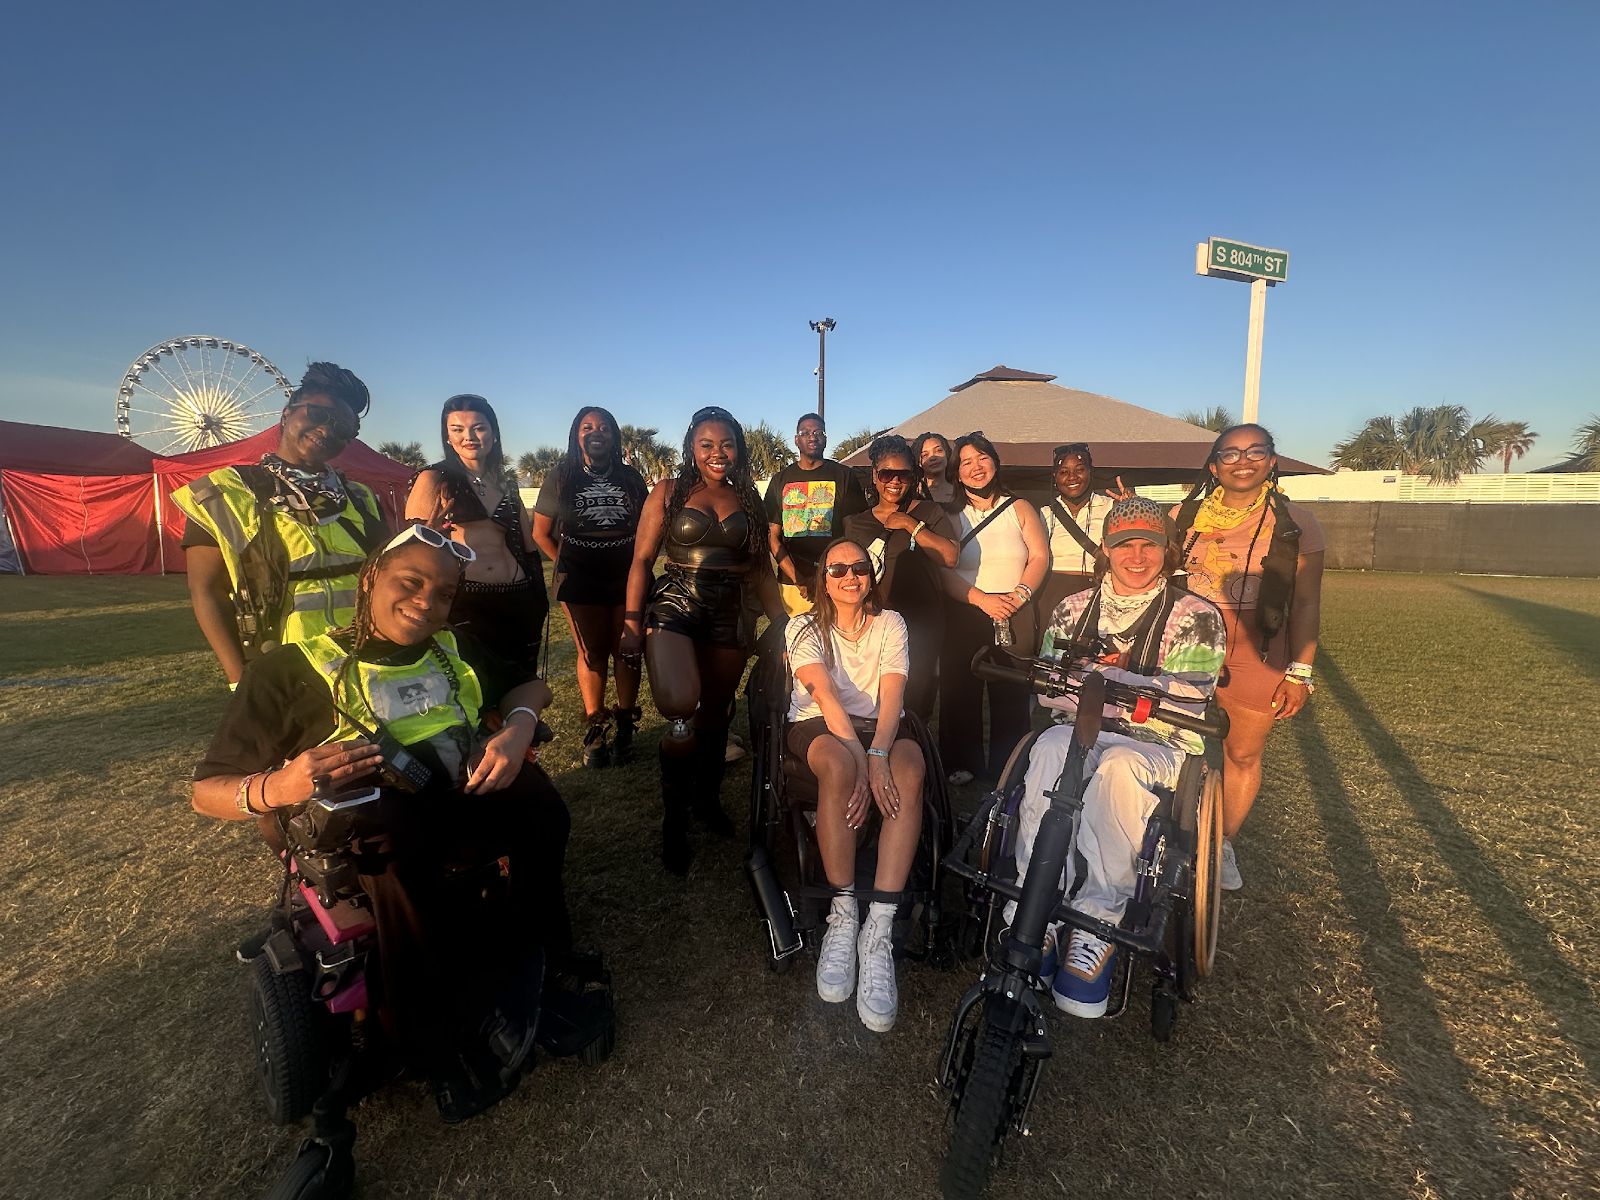 A group of BIPOC individuals participating in the Accessible+ Program poses for a photo on the grass field at Coachella. They are all smiling brightly and having fun.